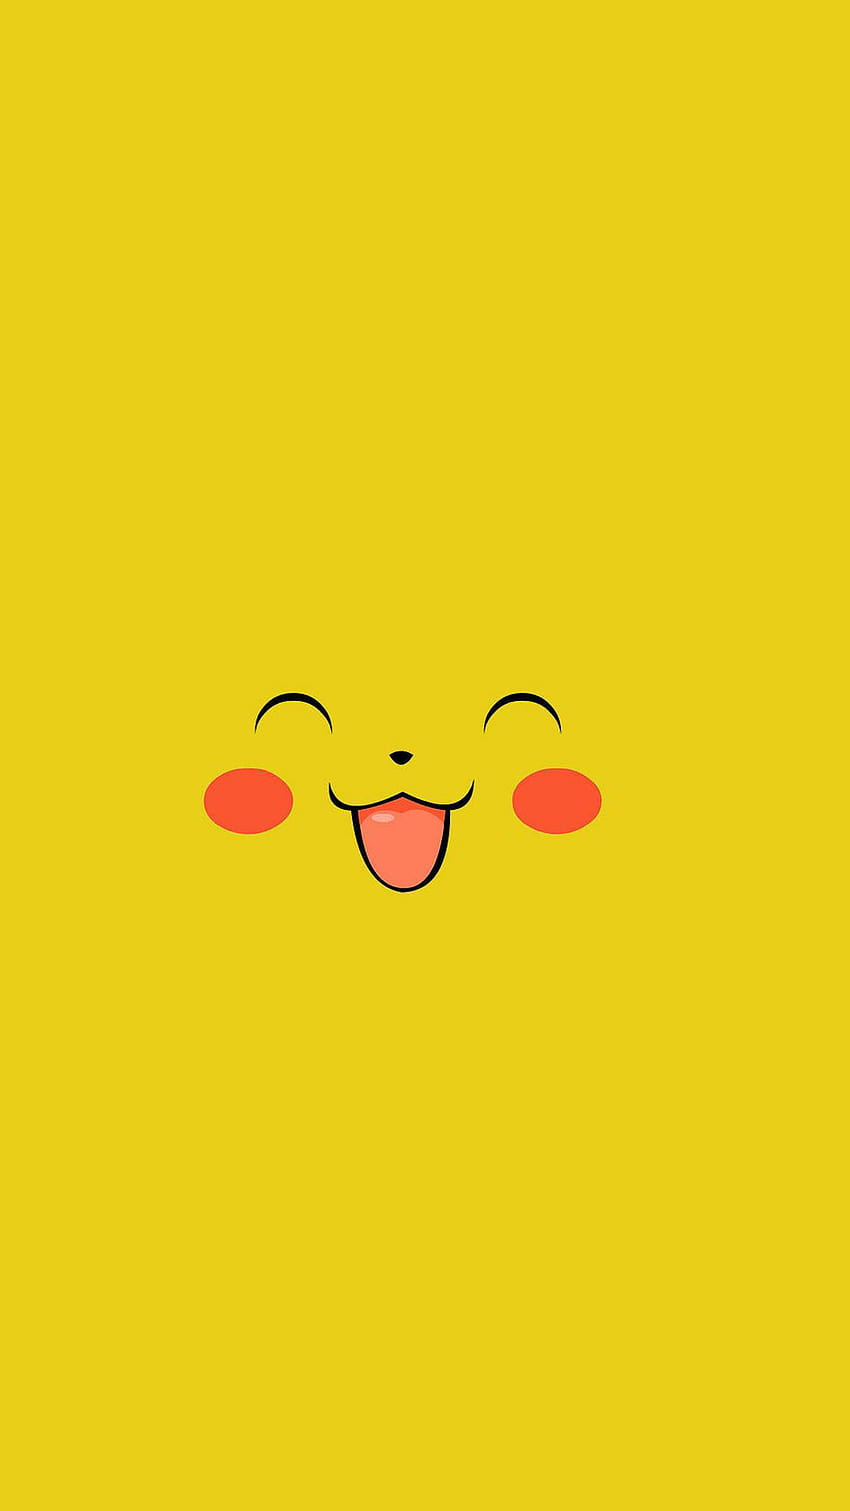 Smile 70 backgrounds [1080x1920] for your , Mobile & Tablet, keep smiling HD phone wallpaper